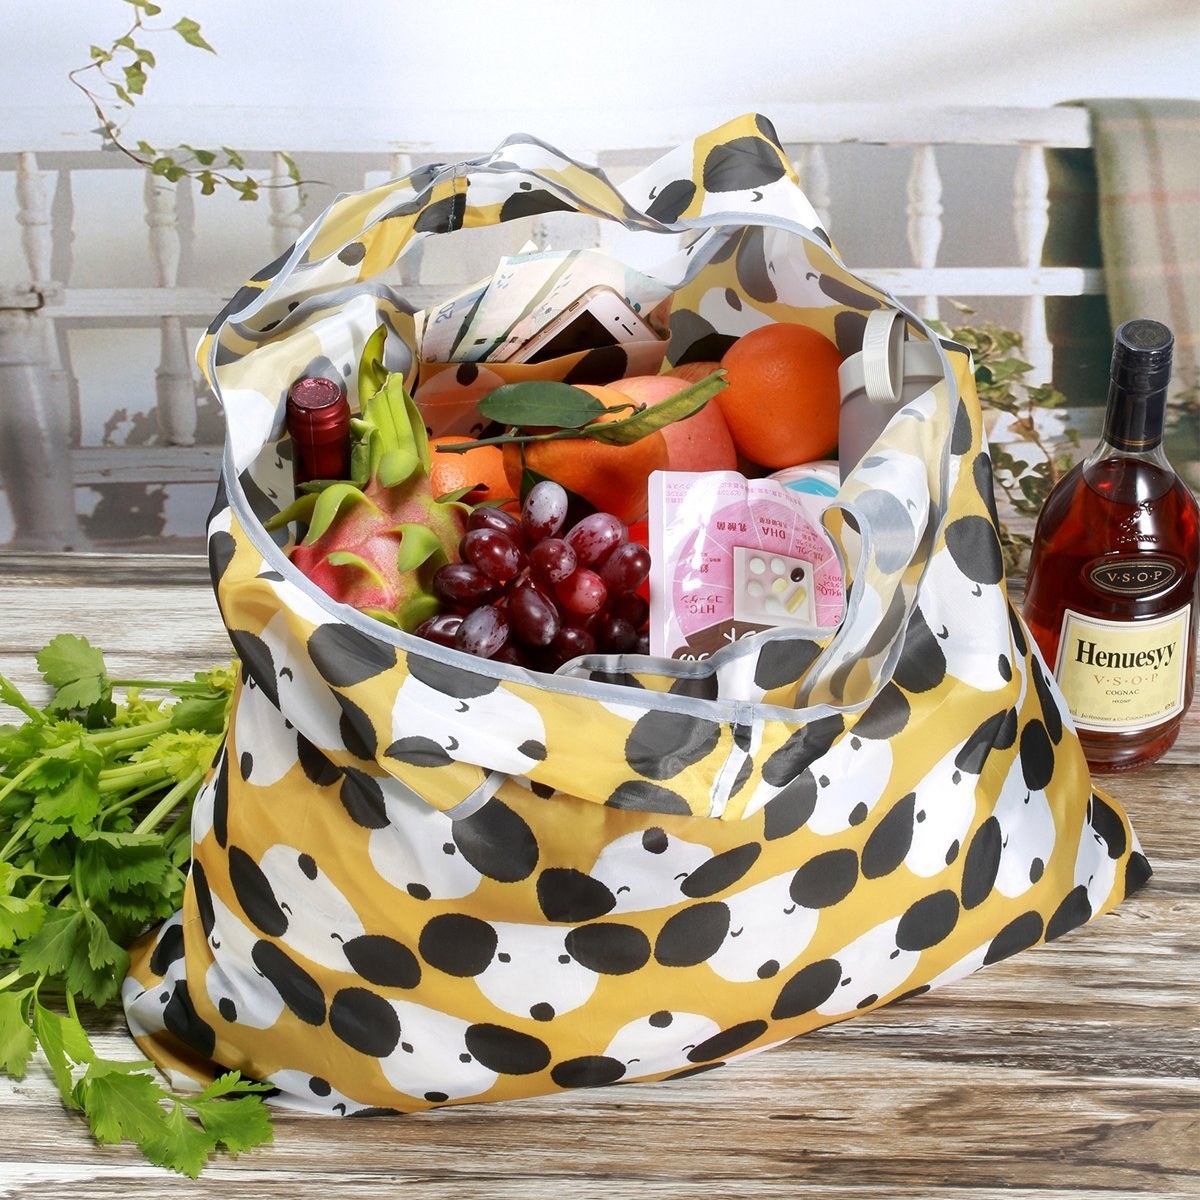  A yellow reusable bag with a handle with a dog print and holding groceries, including a wine bottle, grapes, oranges, and other items